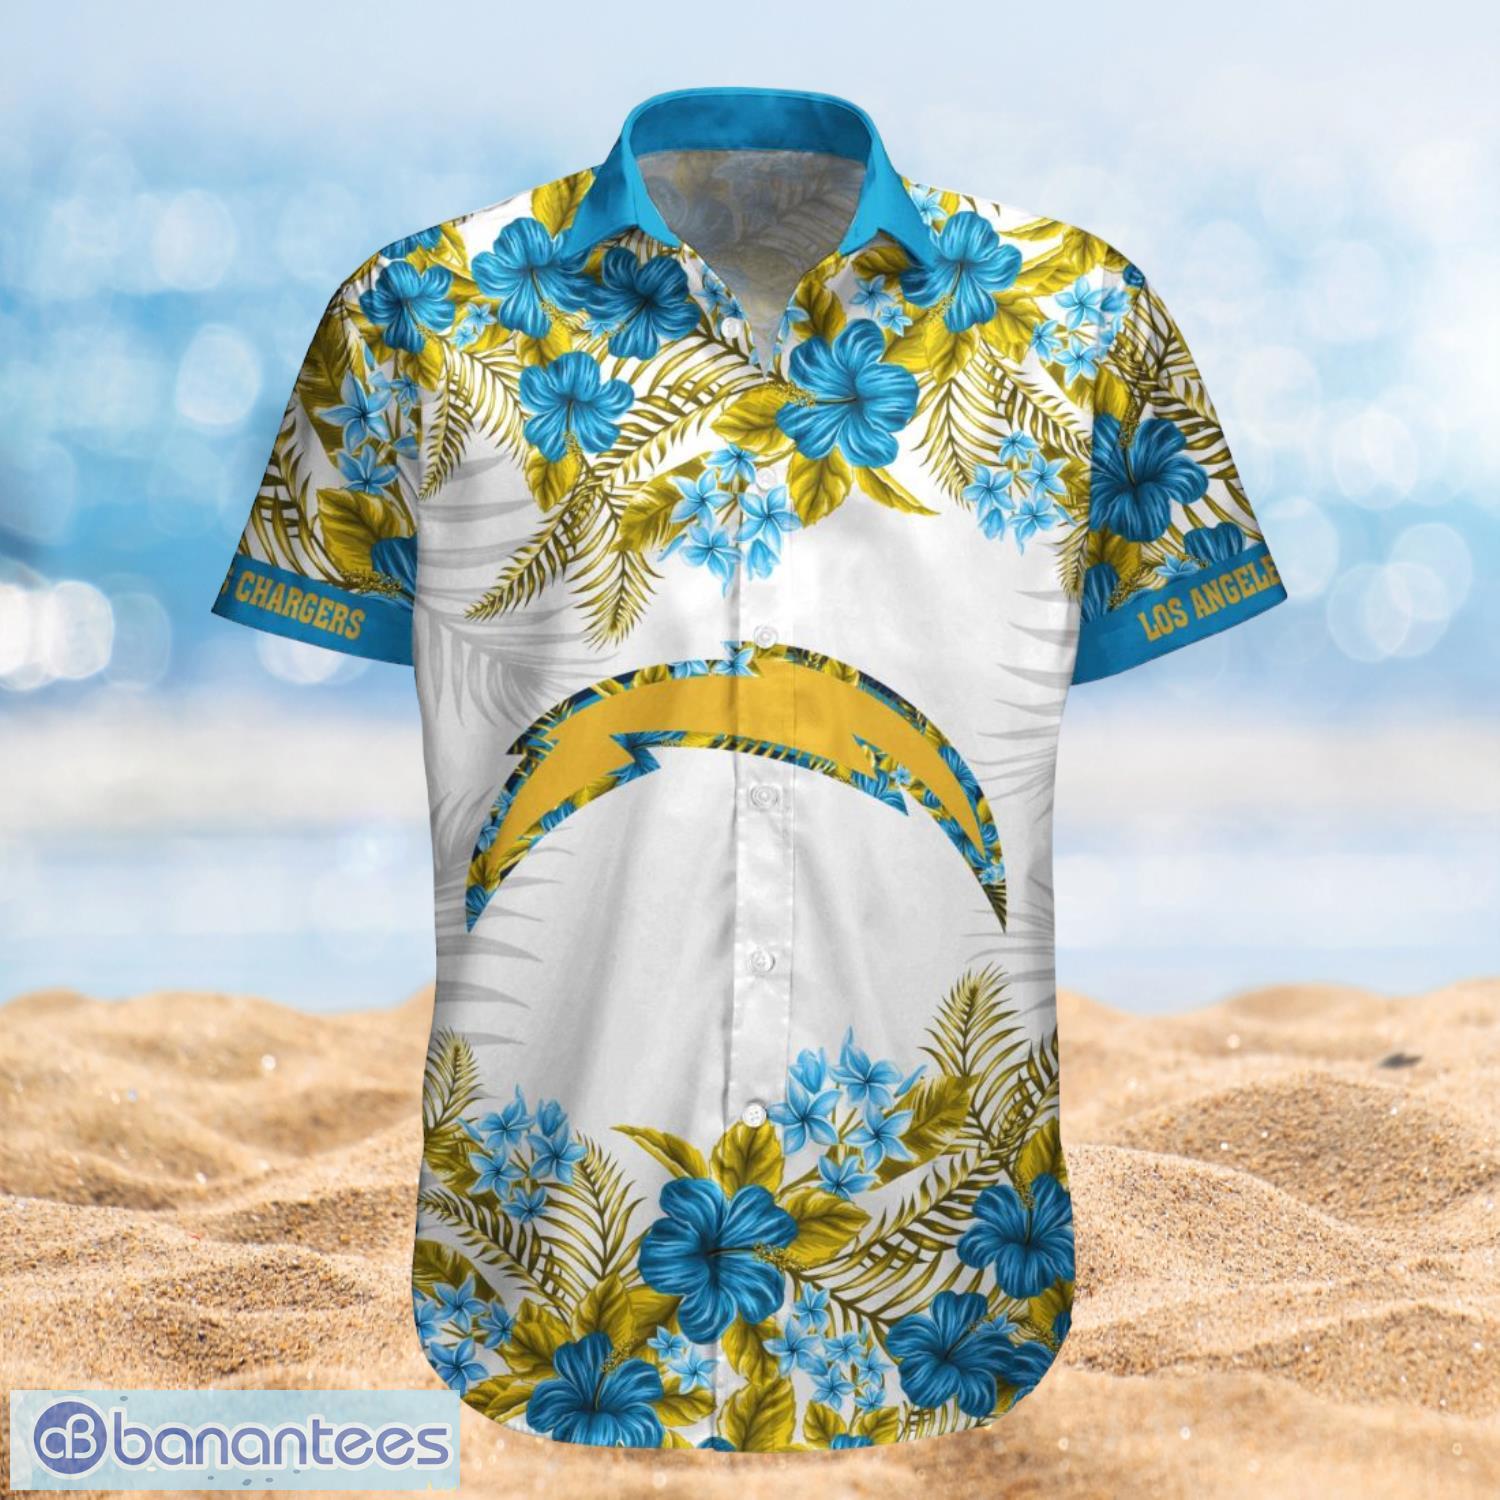 Los Angeles Chargers Summer Beach Shirt and Shorts Full Over Print Product Photo 1